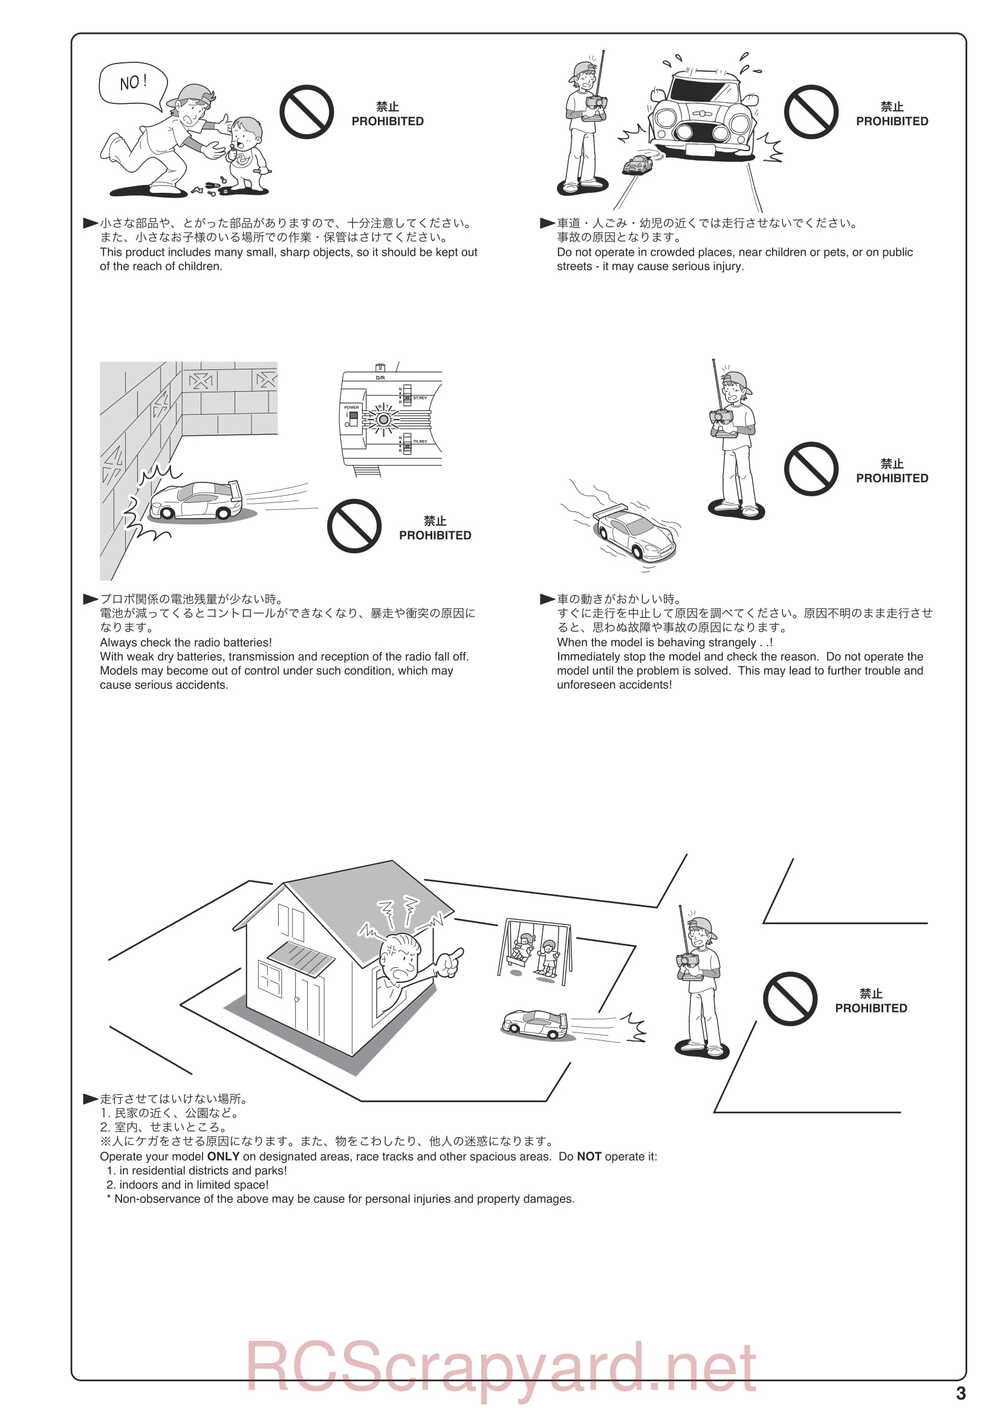 Kyosho - 31265 - V-ONE-R4 - Manual - Page 03